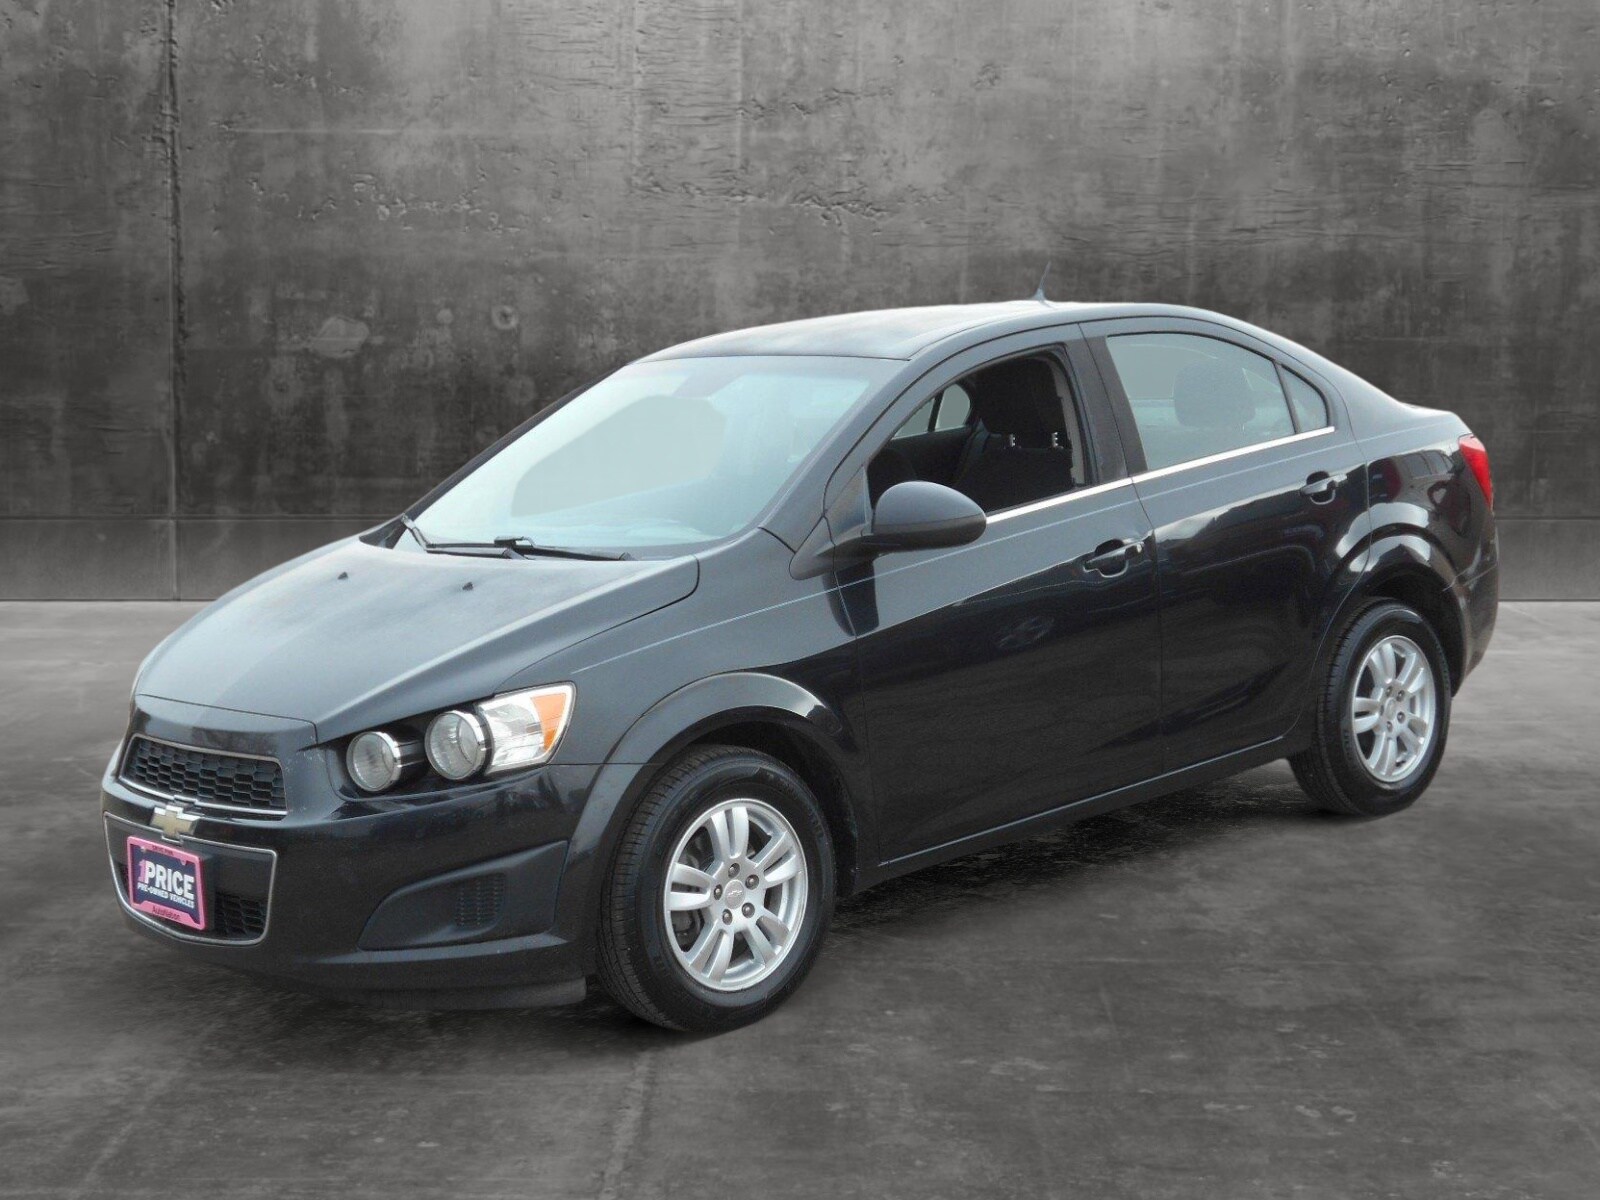 Used 2013 Chevrolet Sonic LT with VIN 1G1JD5SB3D4184605 for sale in Centennial, CO